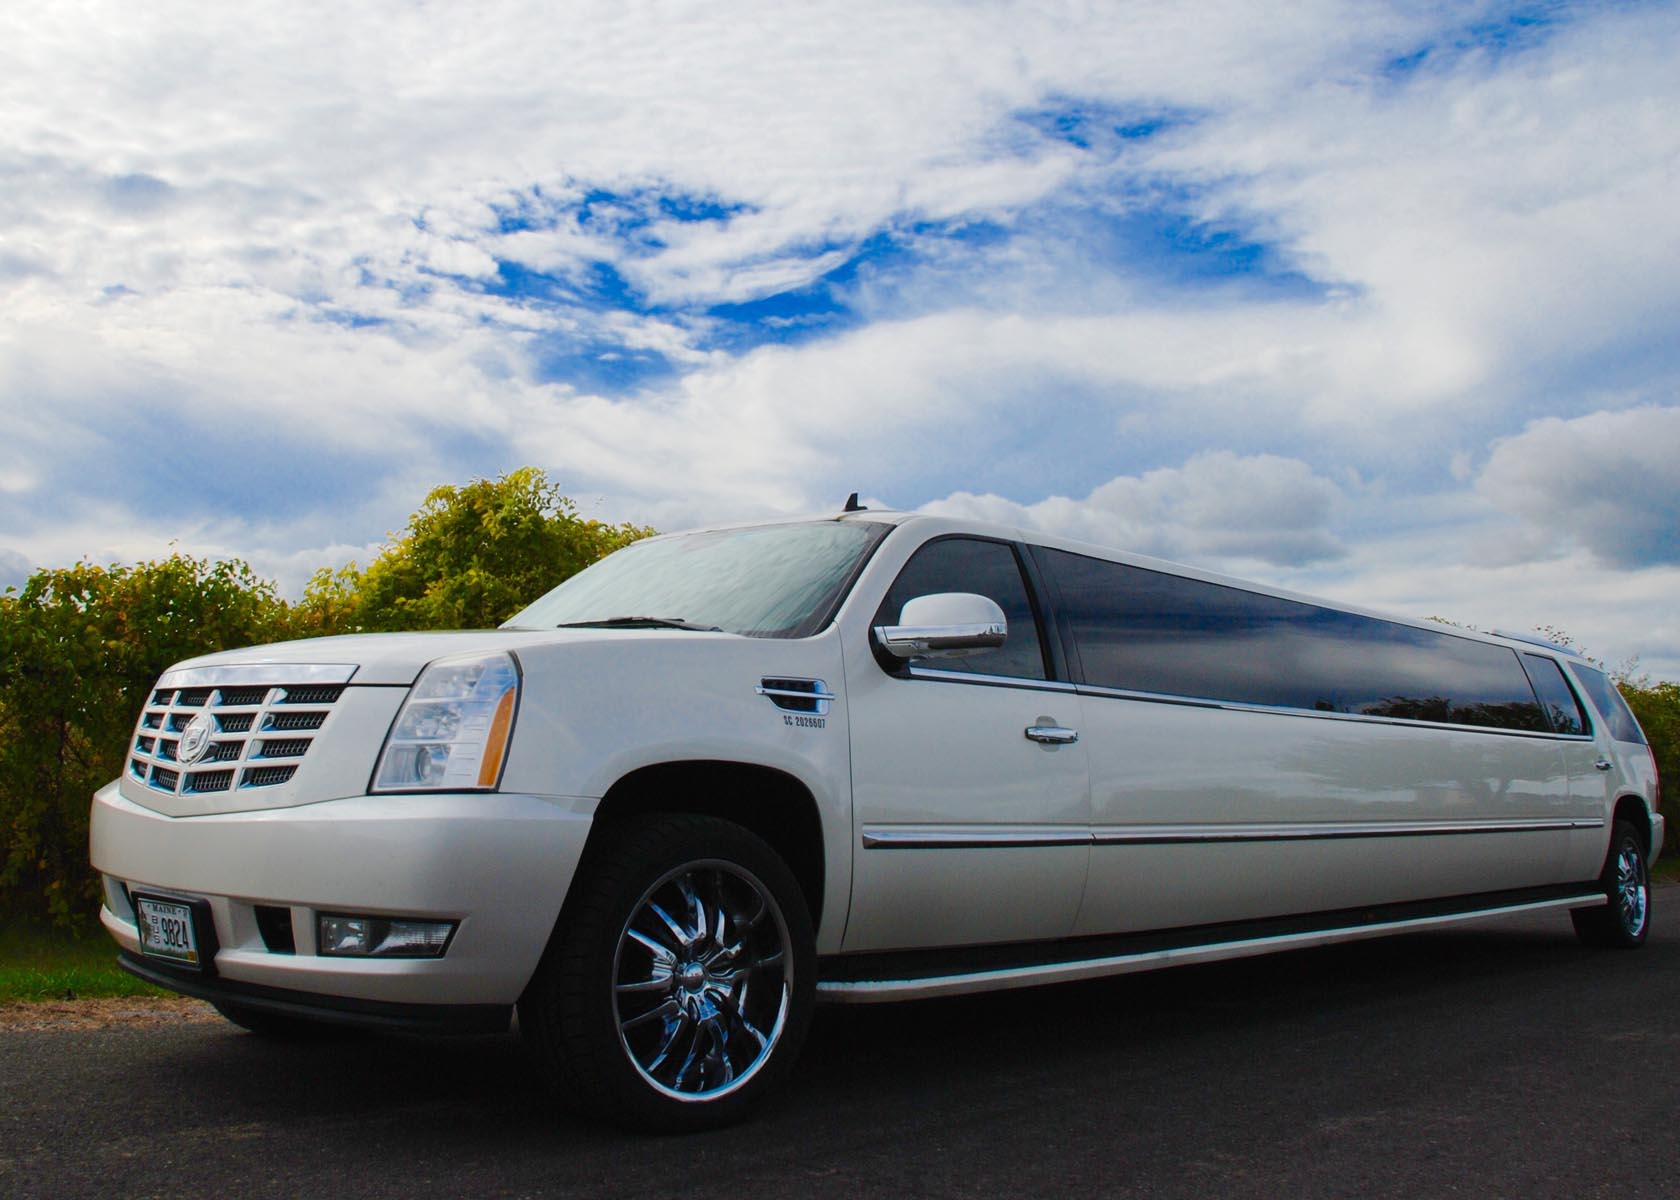 LIMO SERVICE GENERAL MYTHS FREE